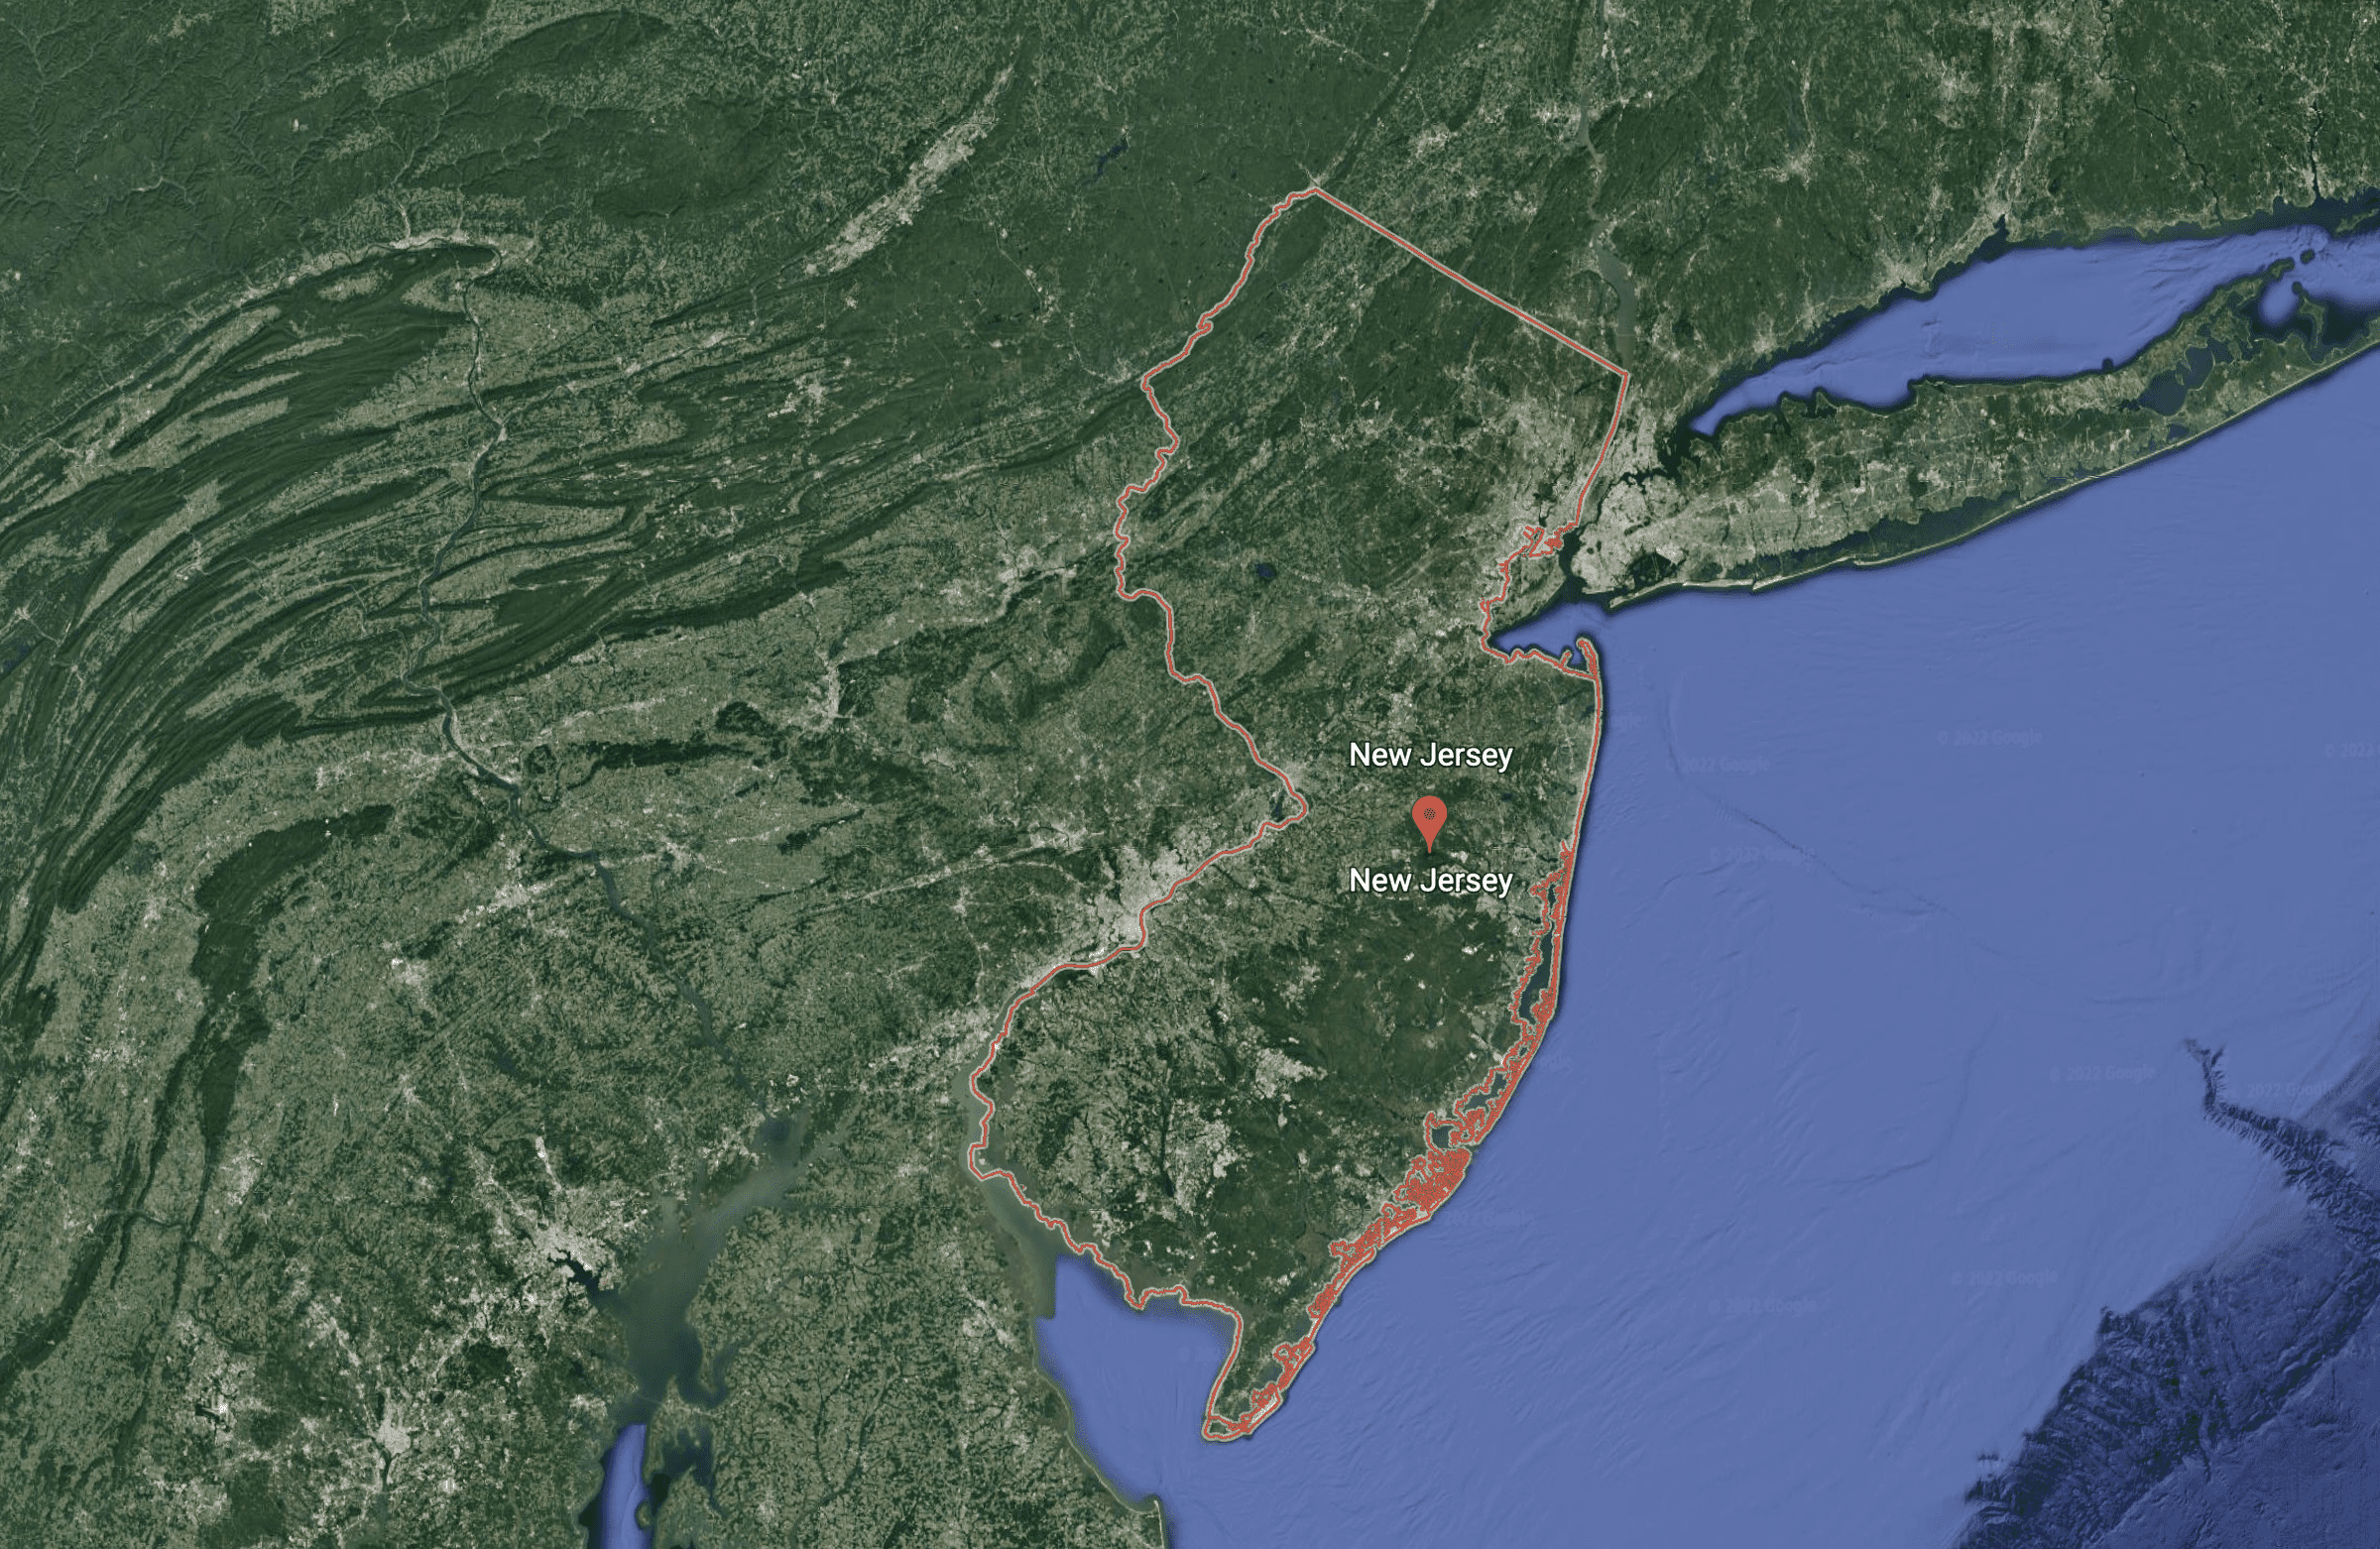 Satellite overhead image of New Jersey from Google Earth 2022